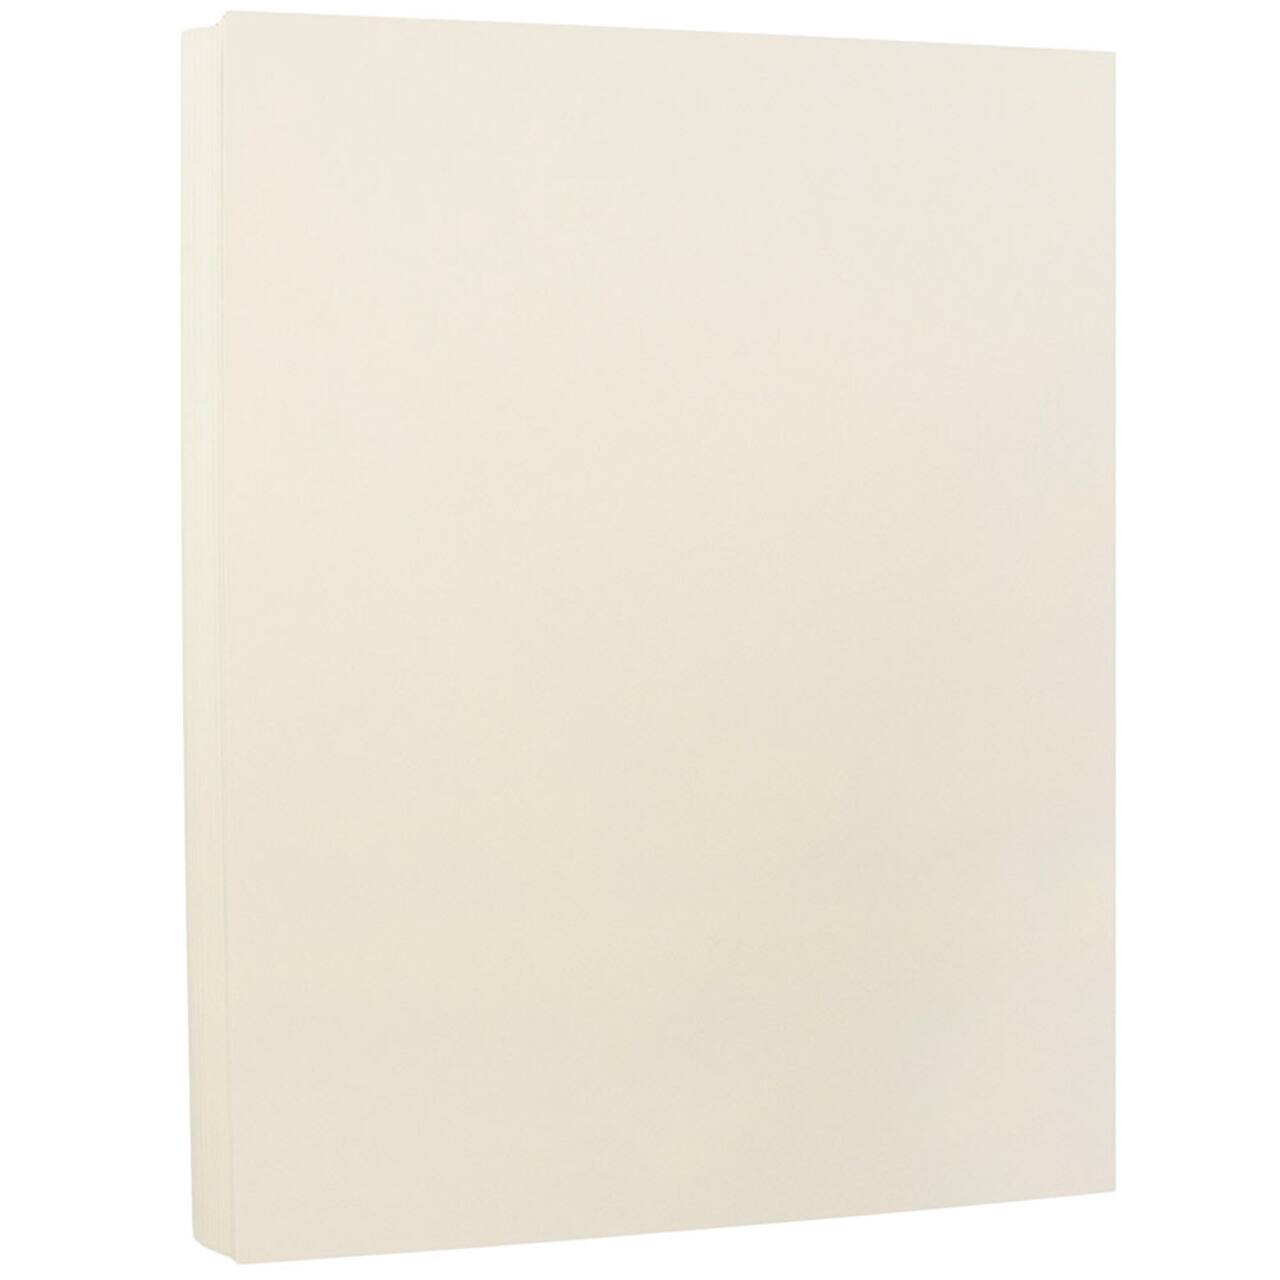 Jam Paper Strathmore Cardstock - 8 1/2 x 11 - 80lb Ivory Wove - 50 Sheets/Pack